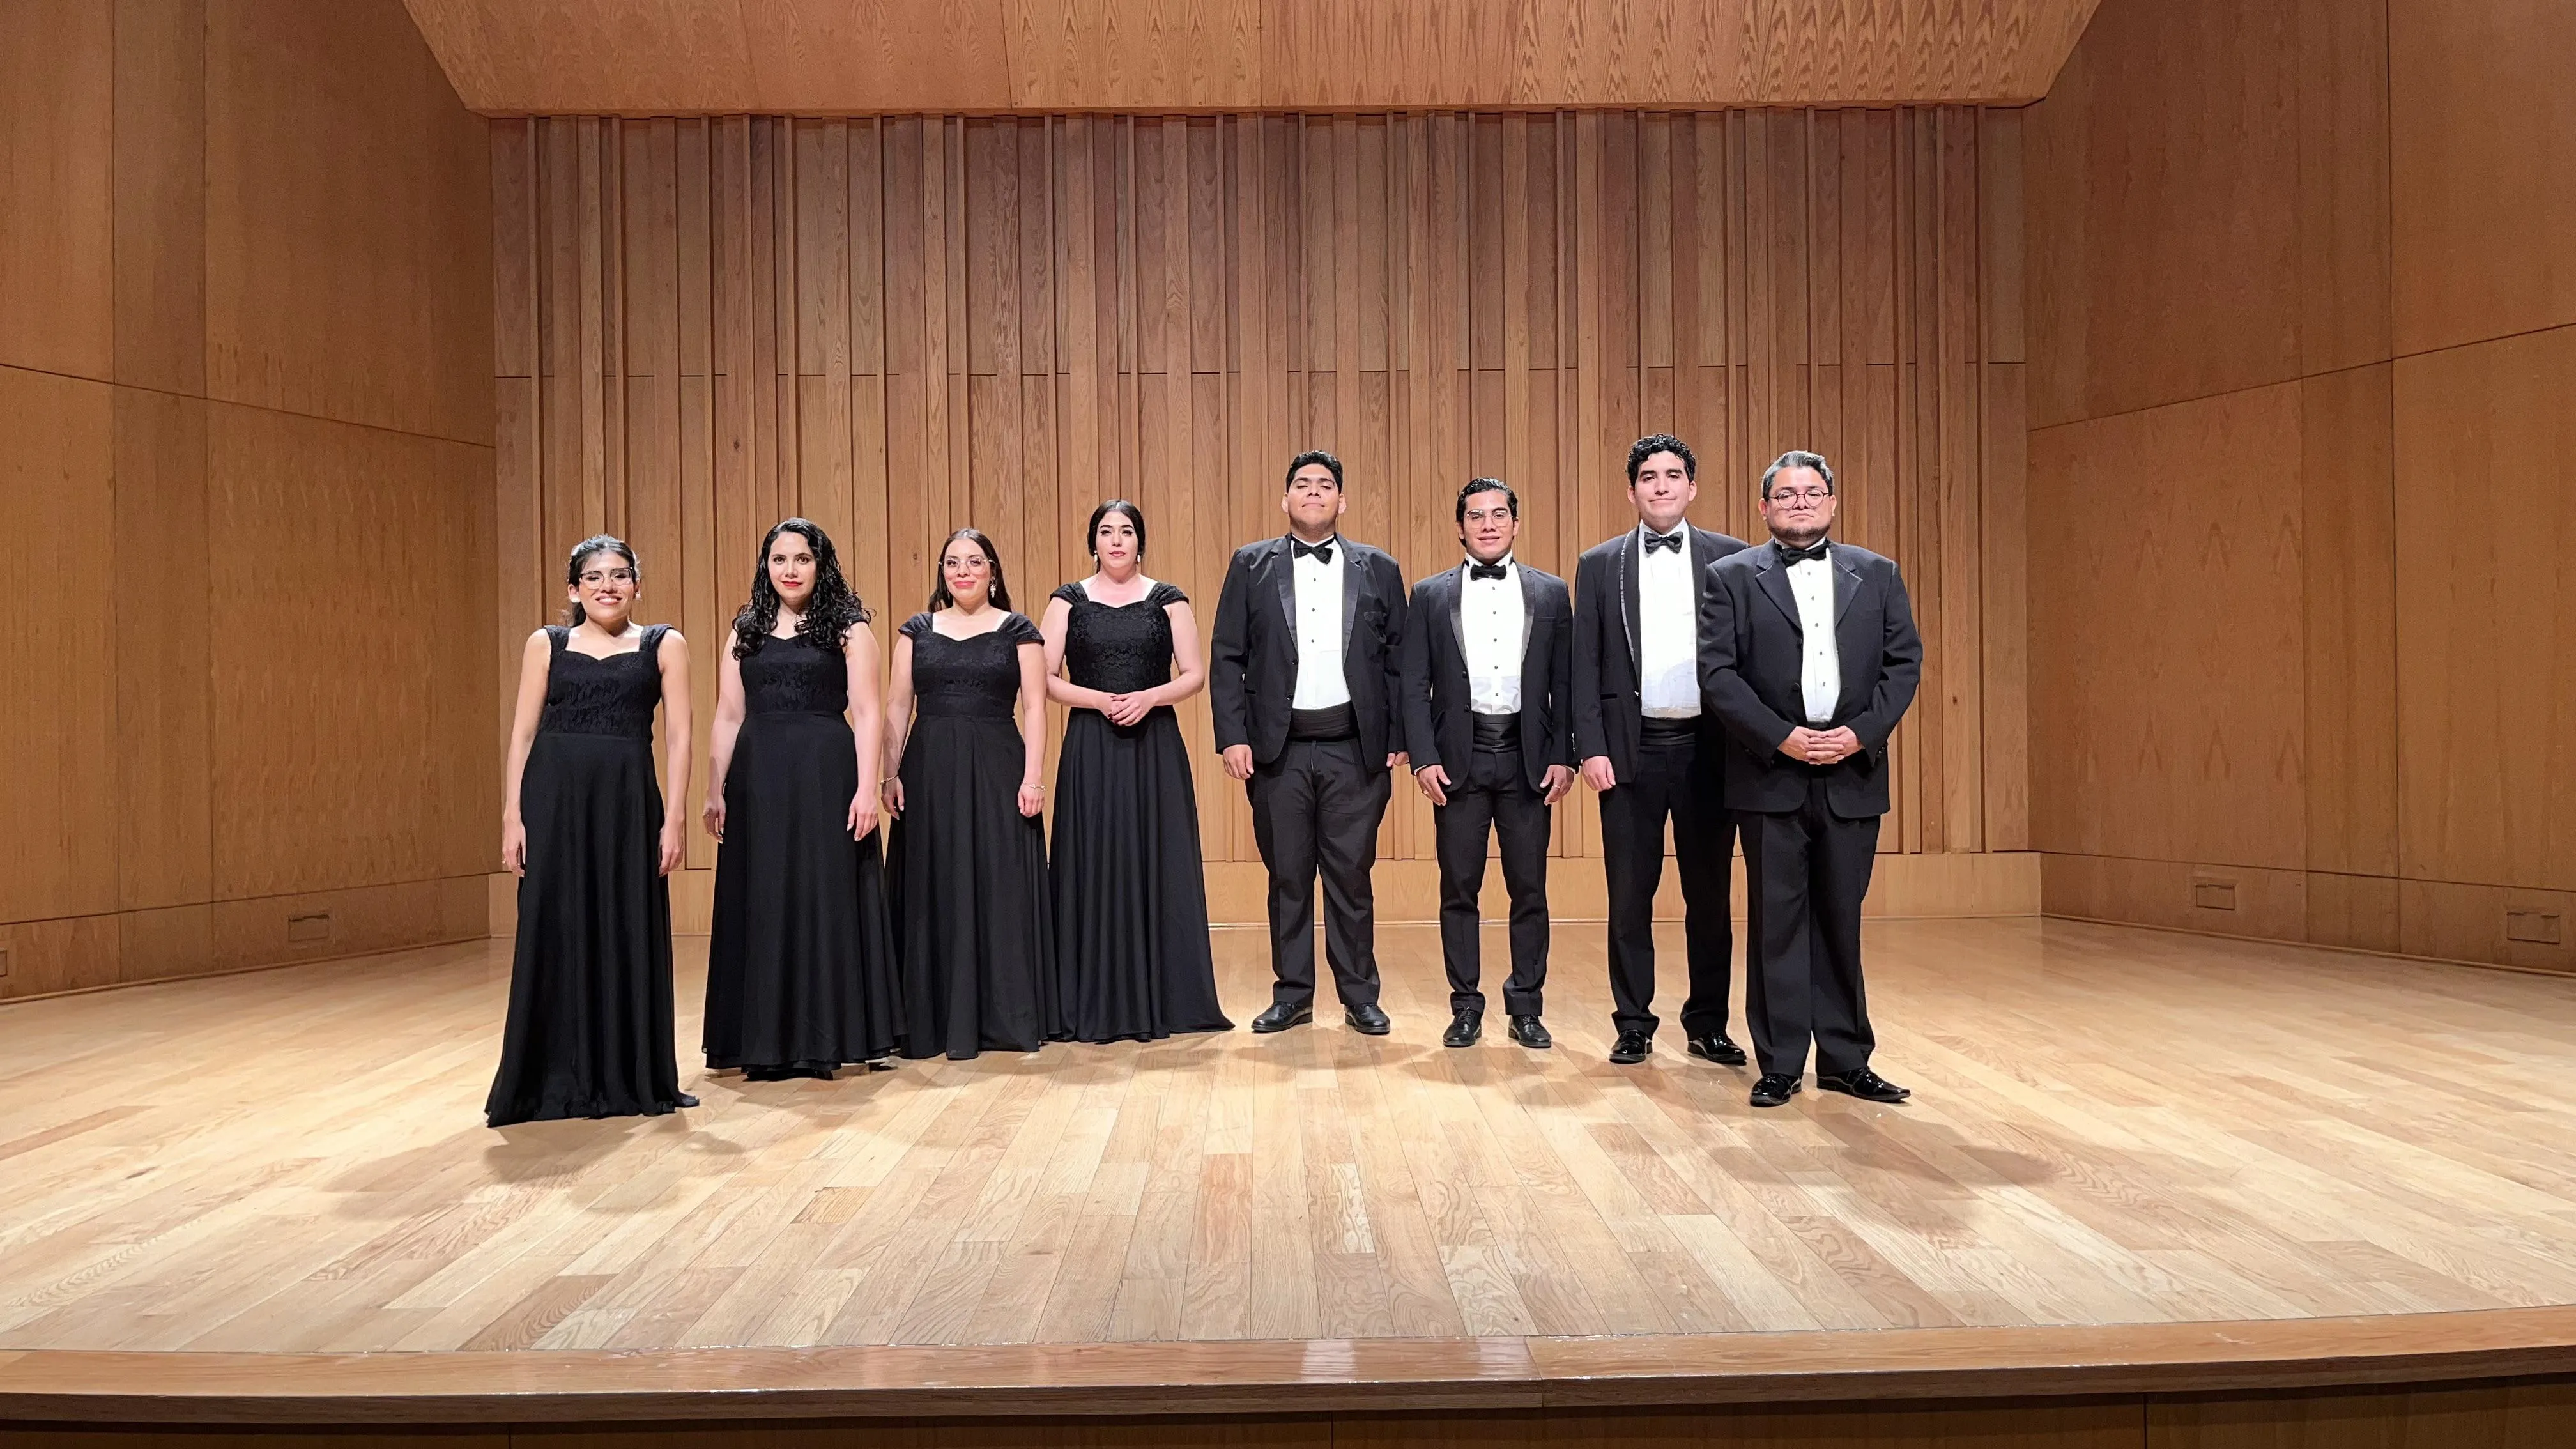 Octet of voices Mexican Voices Through Europe